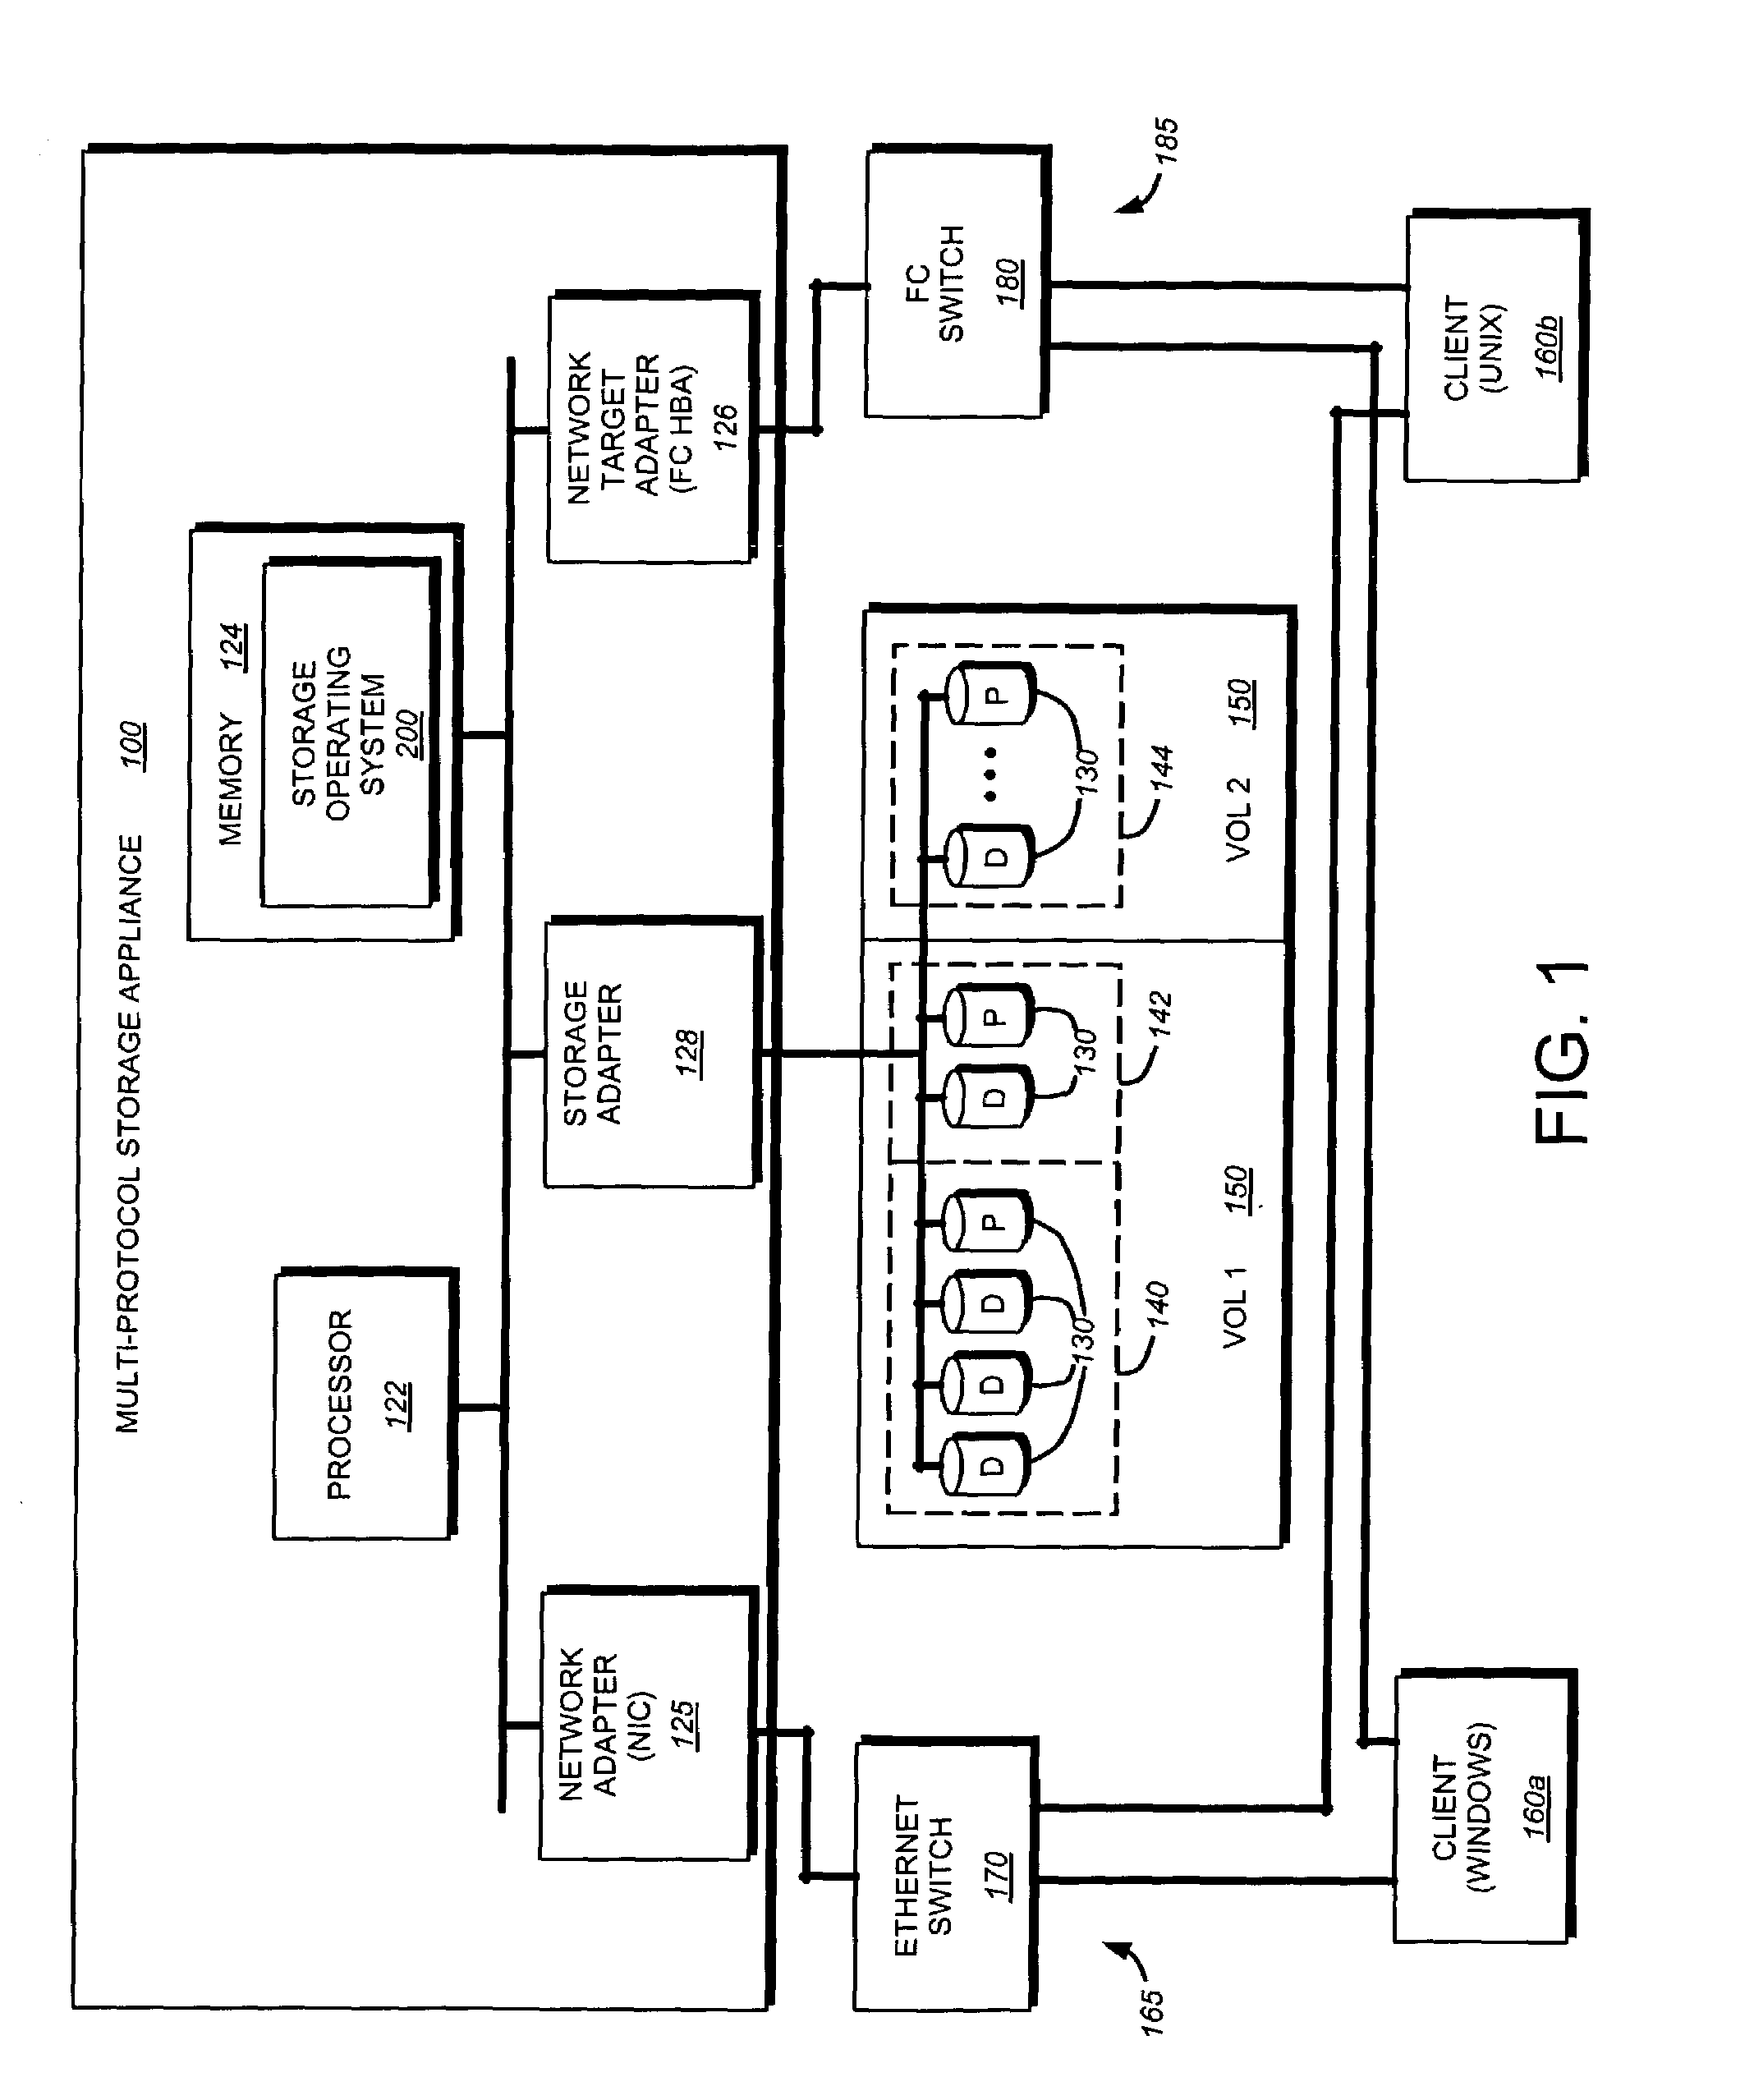 Storage virtualization by layering virtual disk objects on a file system